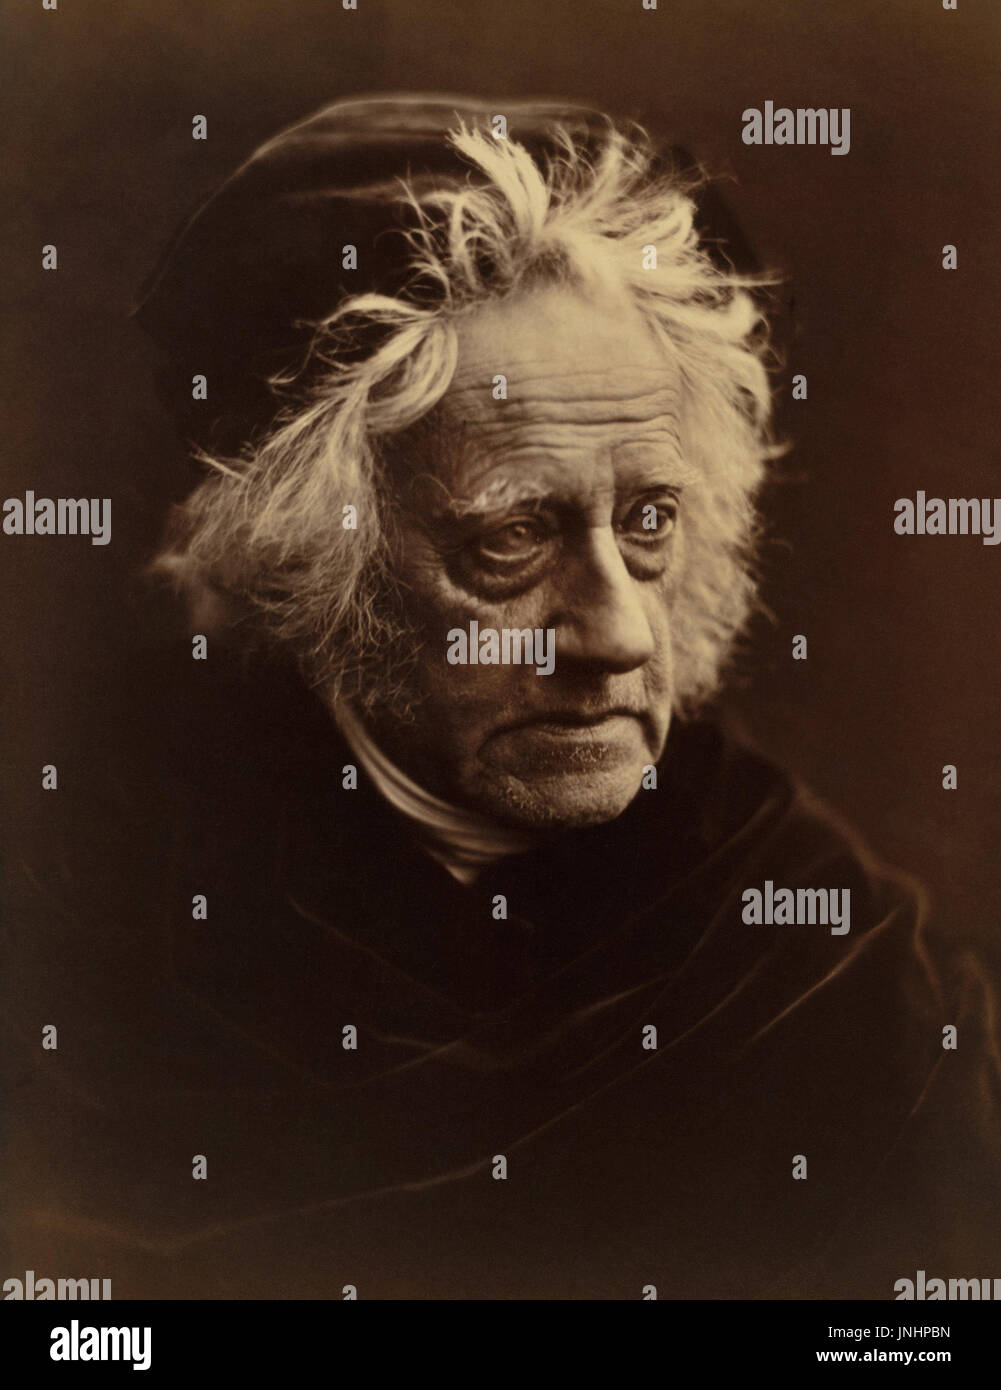 Sir John Herschel (1792-1871) was an English polymath, astronomer, mathematician, chemist, inventor, and key figure in the development of photography. He invented cyanotype photography and various processes that that aided other early photography pioneers, including Daguerre. Herschel is also credited with coining the term photography in 1839. (Photograph by Julia Margaret Cameron in April, 1867) Stock Photo